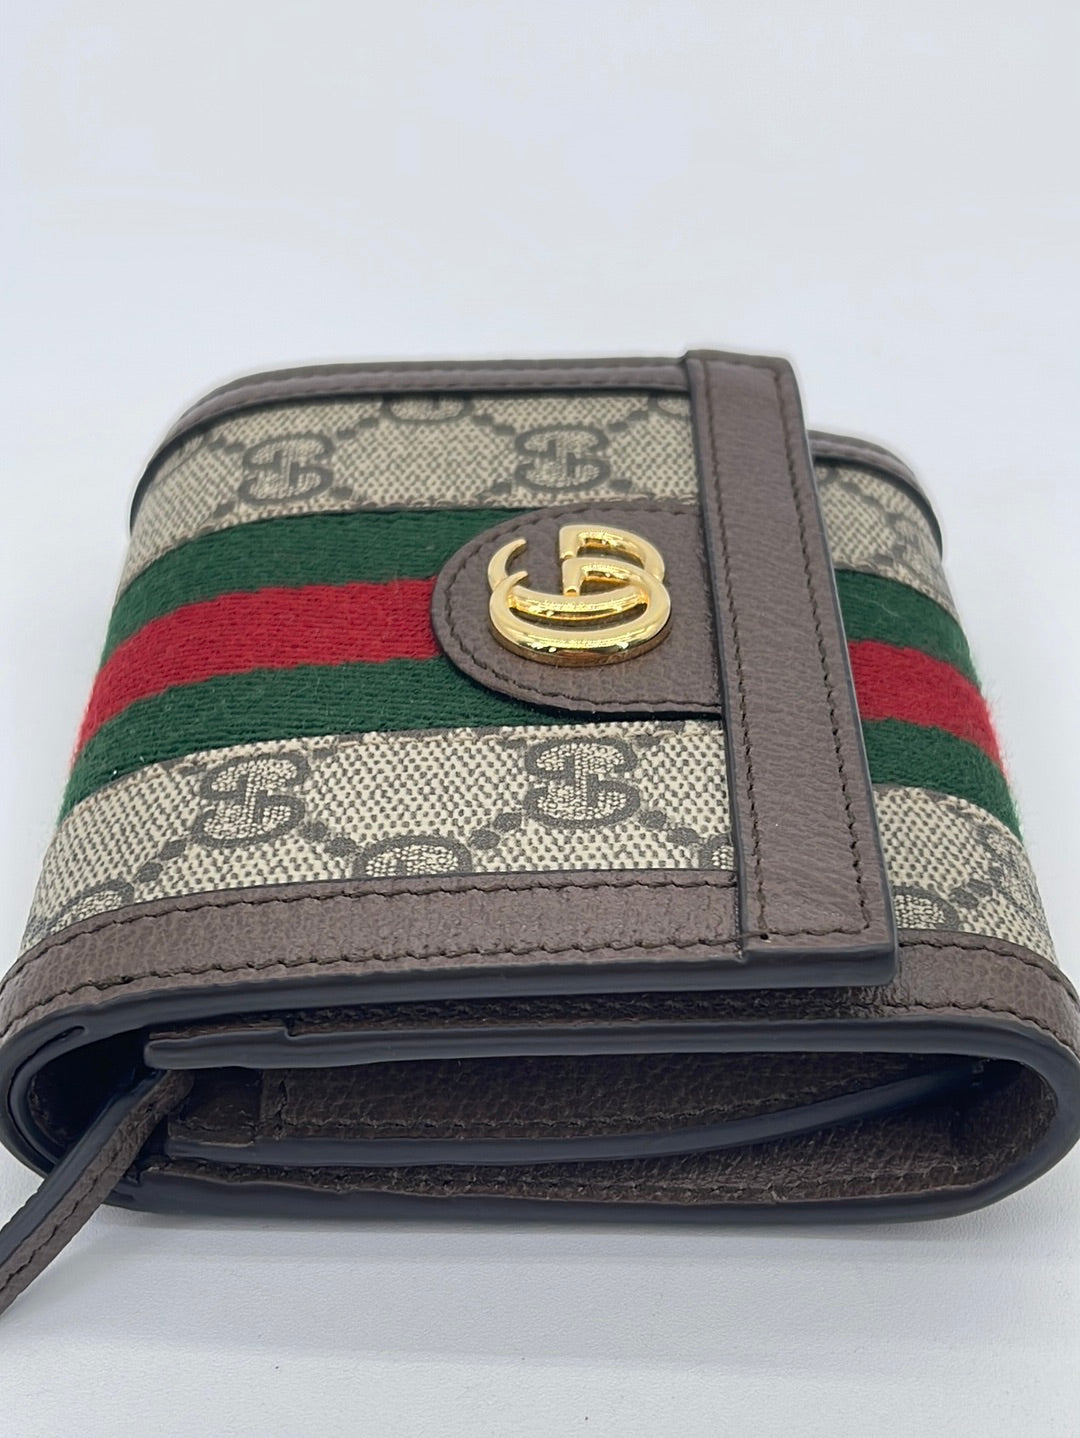 Preloved Gucci Supreme GG Ophidia Card Case Wallet 5986622184 052323